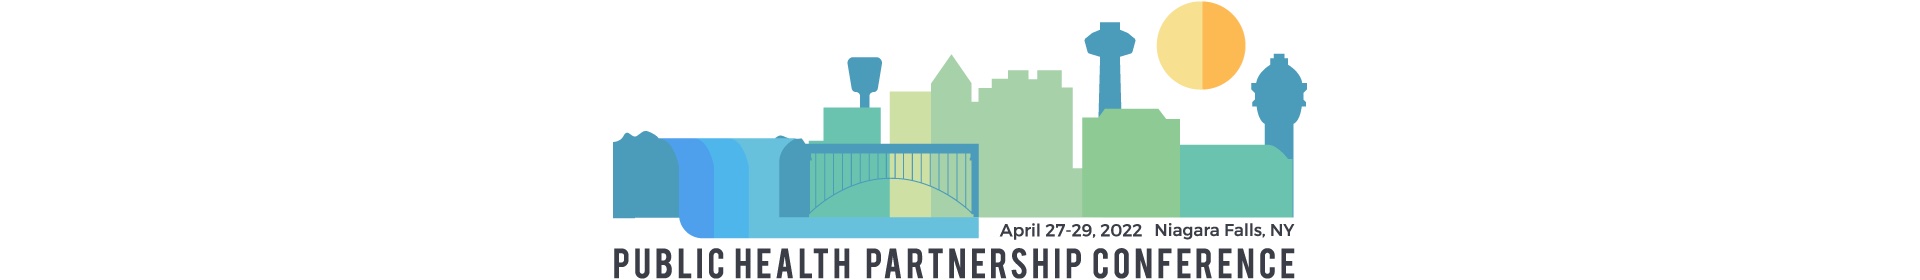 2022 Public Health Partnership Conference Event Banner